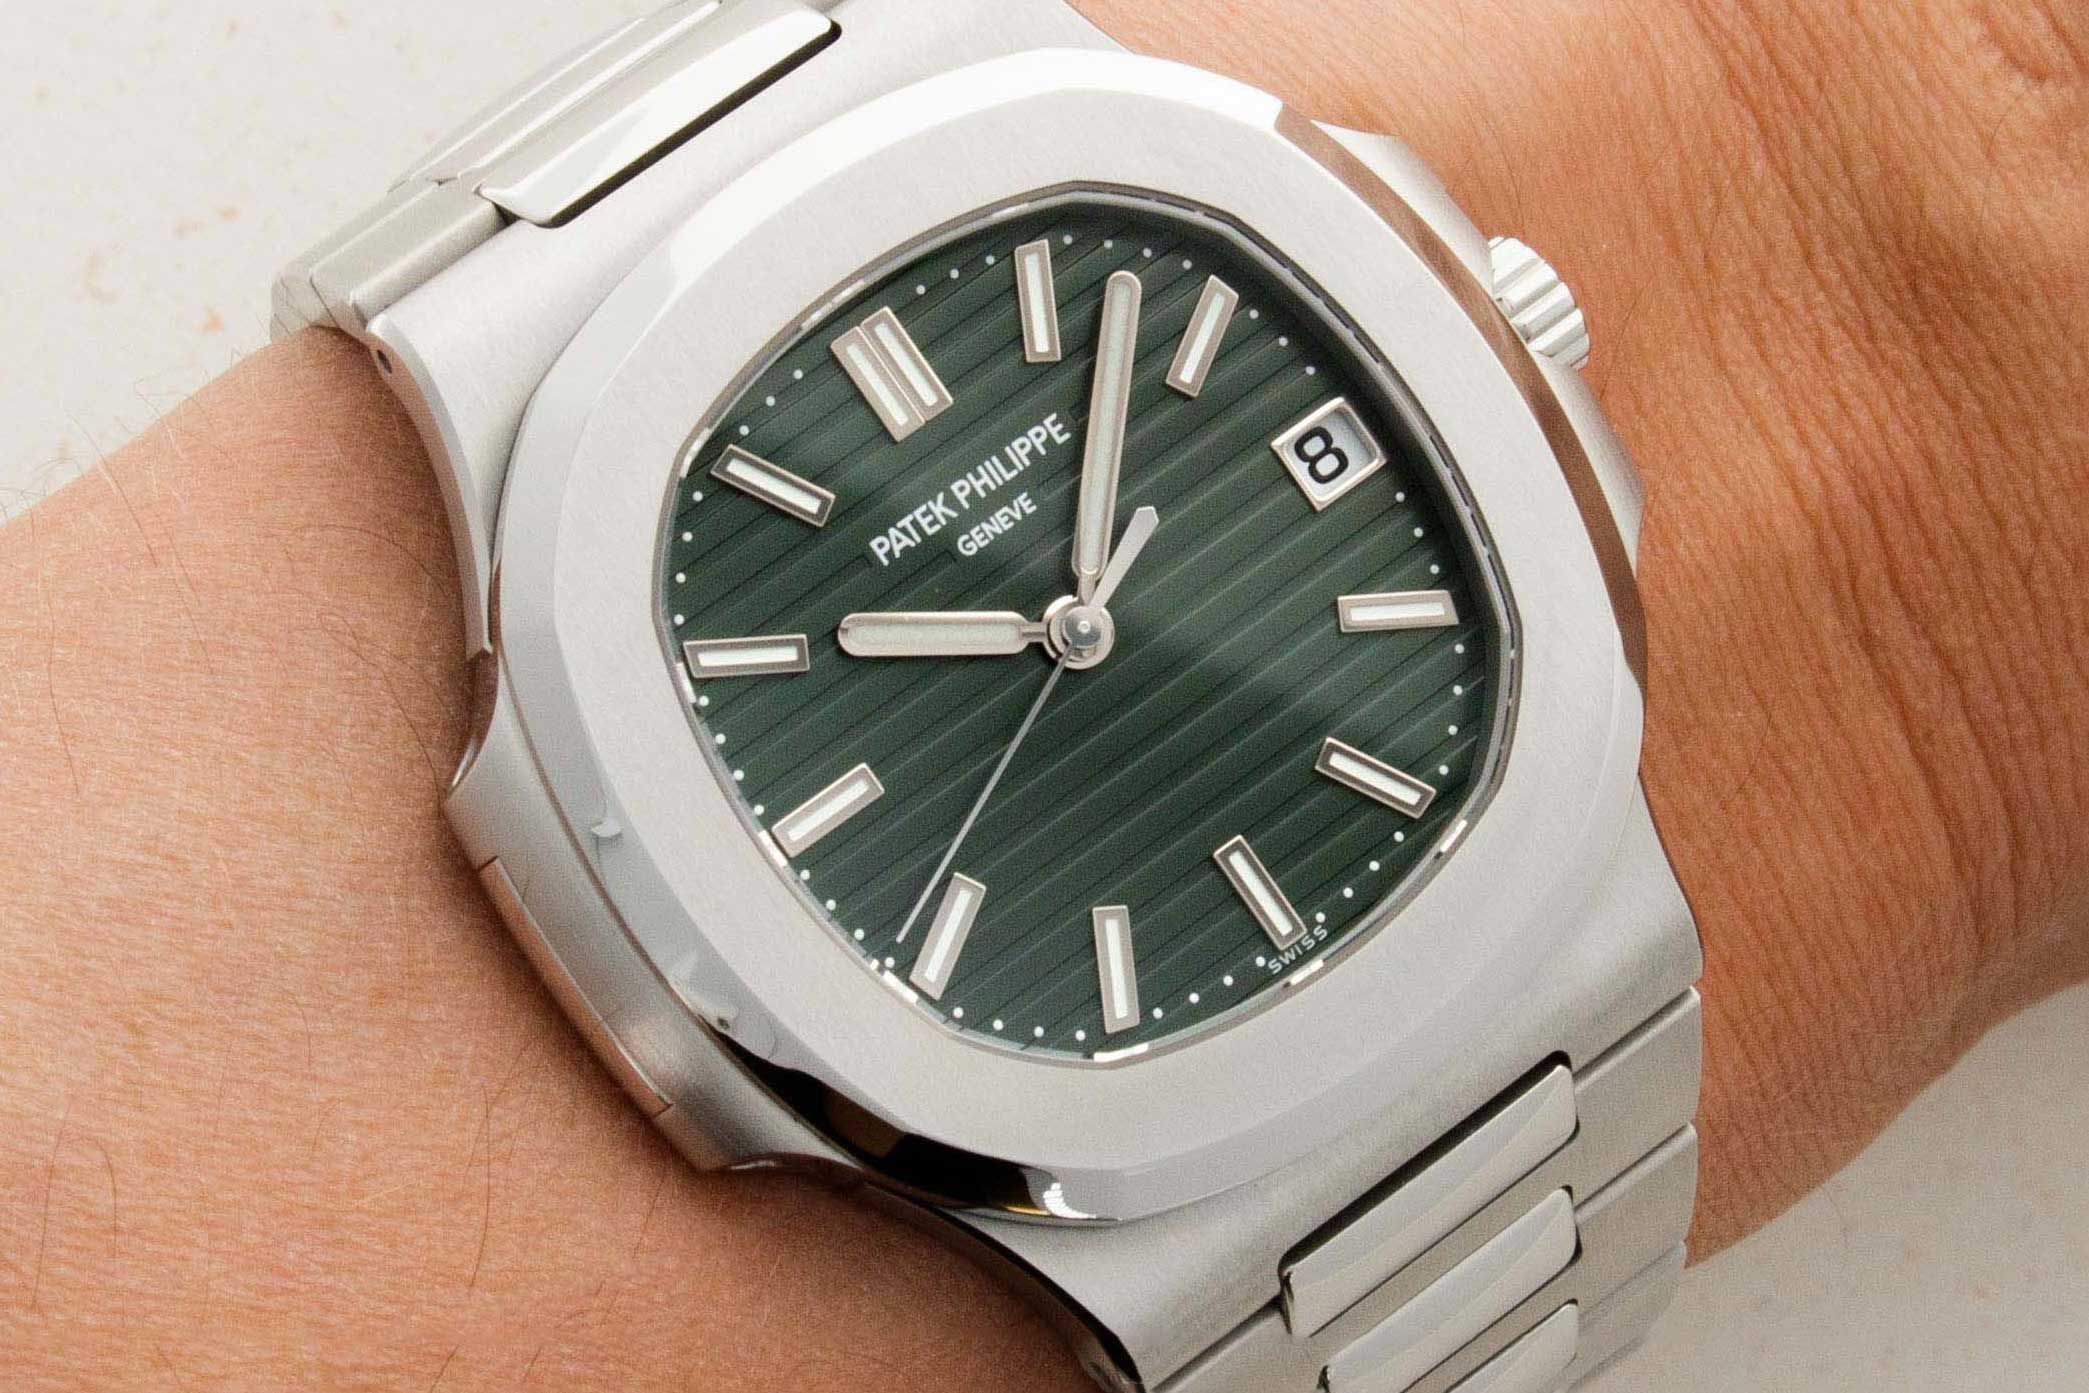 LoupeThis.com sold an instance of the The infamously sold End of Series 5711 with Olive Green Dial, ref. 5711/1A-014 on 28 October 2021, for USD 369,000 (image: loupethis.com)